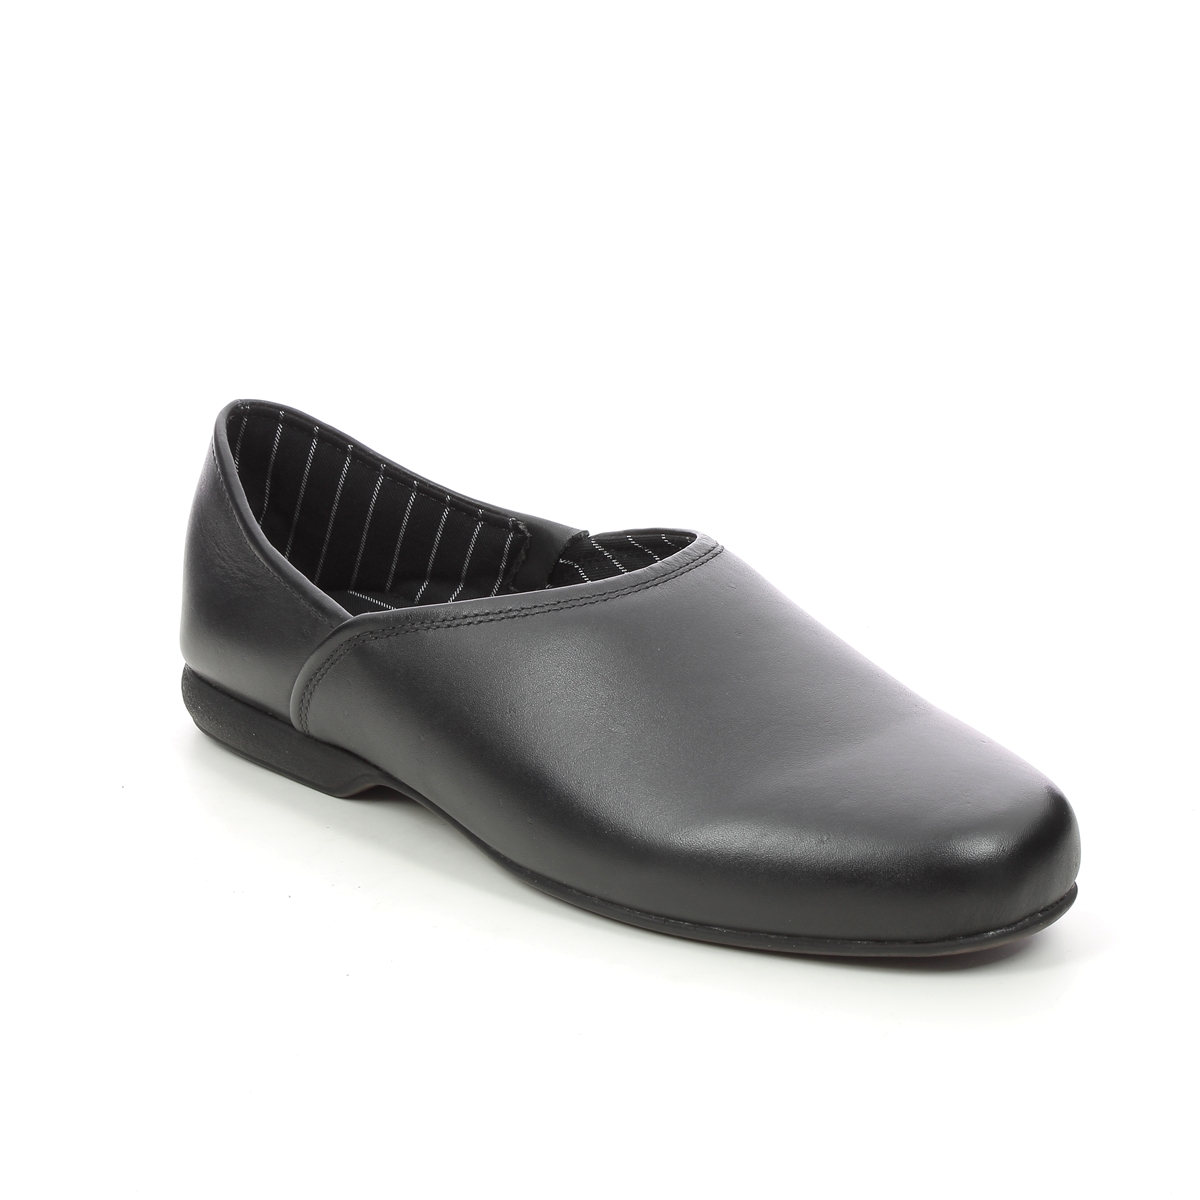 Clarks Harston Elite Black Leather Mens Slippers 447207G In Size 10 In Plain Black Leather G Width Fitting